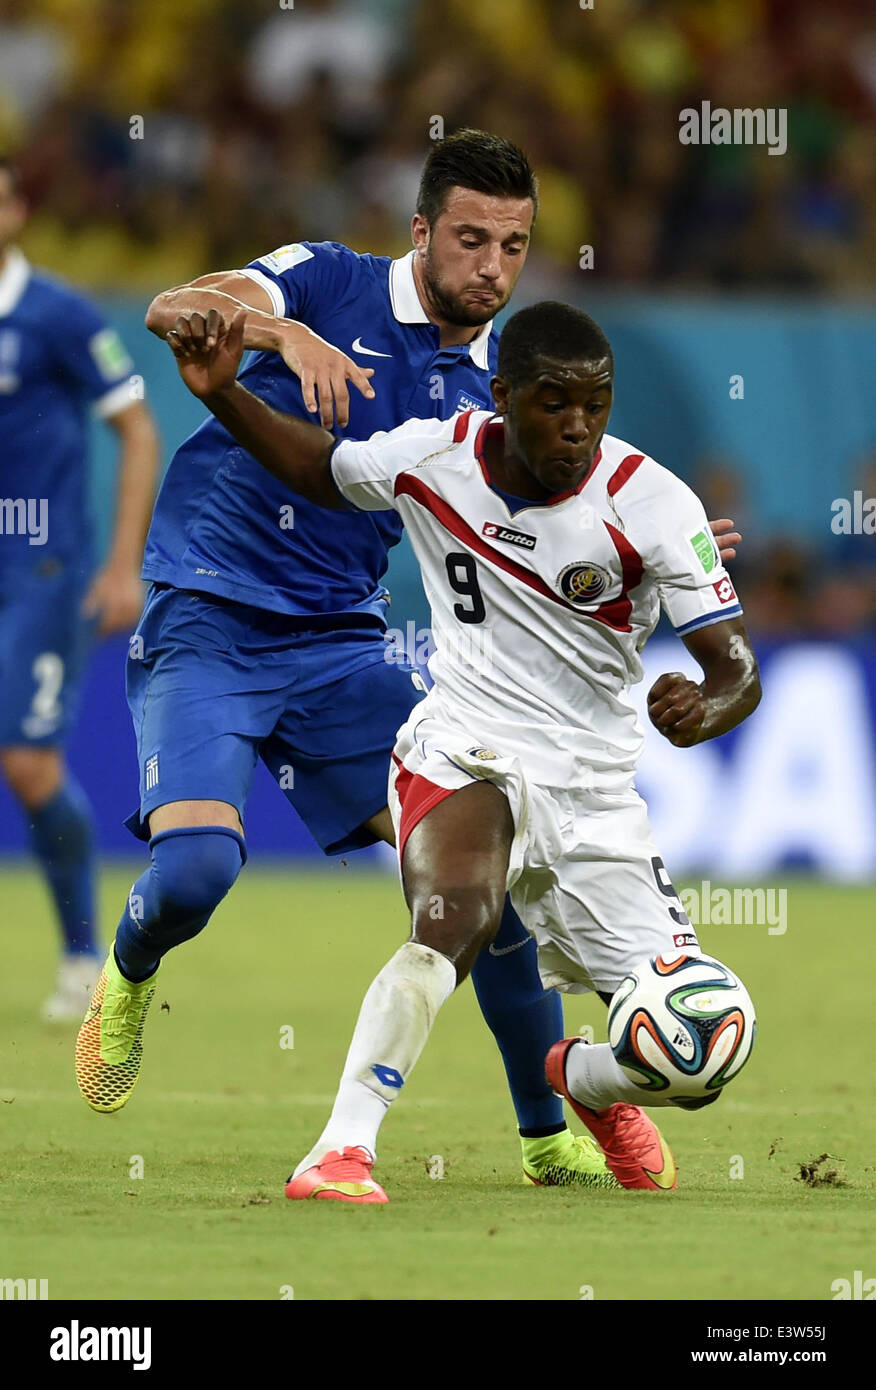 (140629) -- RECIFE, June 29, 2014 (Xinhua) -- Costa Rica's Joel Campbell (front) competes during a Round of 16 match between Costa Rica and Greece of 2014 FIFA World Cup at the Arena Pernambuco Stadium in Recife, Brazil, on June 29, 2014.(Xinhua/Yang Lei)(xzj) Stock Photo